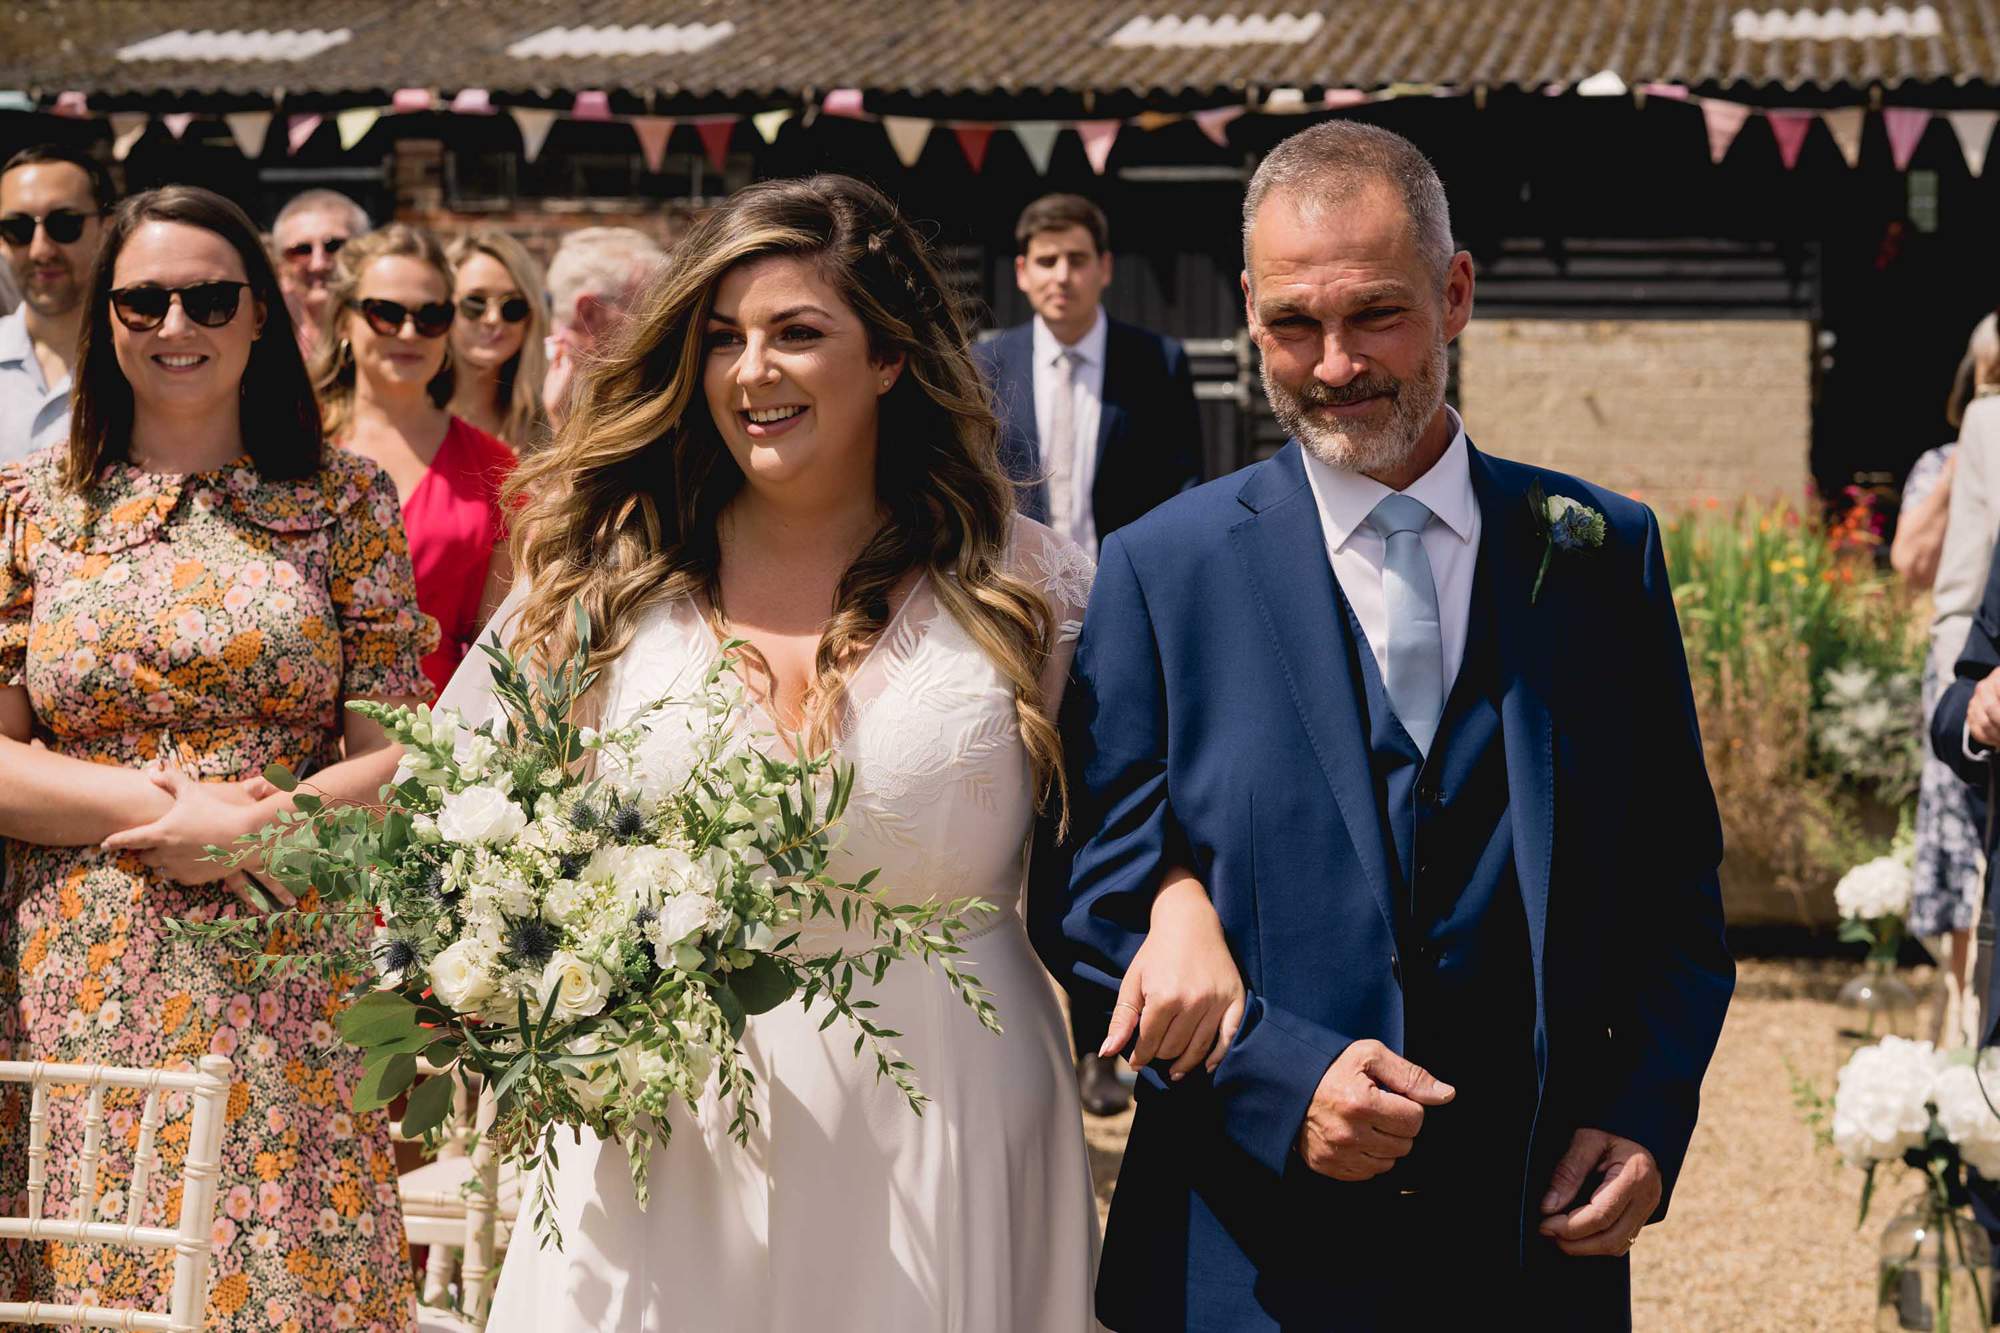 The bride and her father walk down the aisle at a wedding at the Sussex Barn wedding venue in Hellingly.